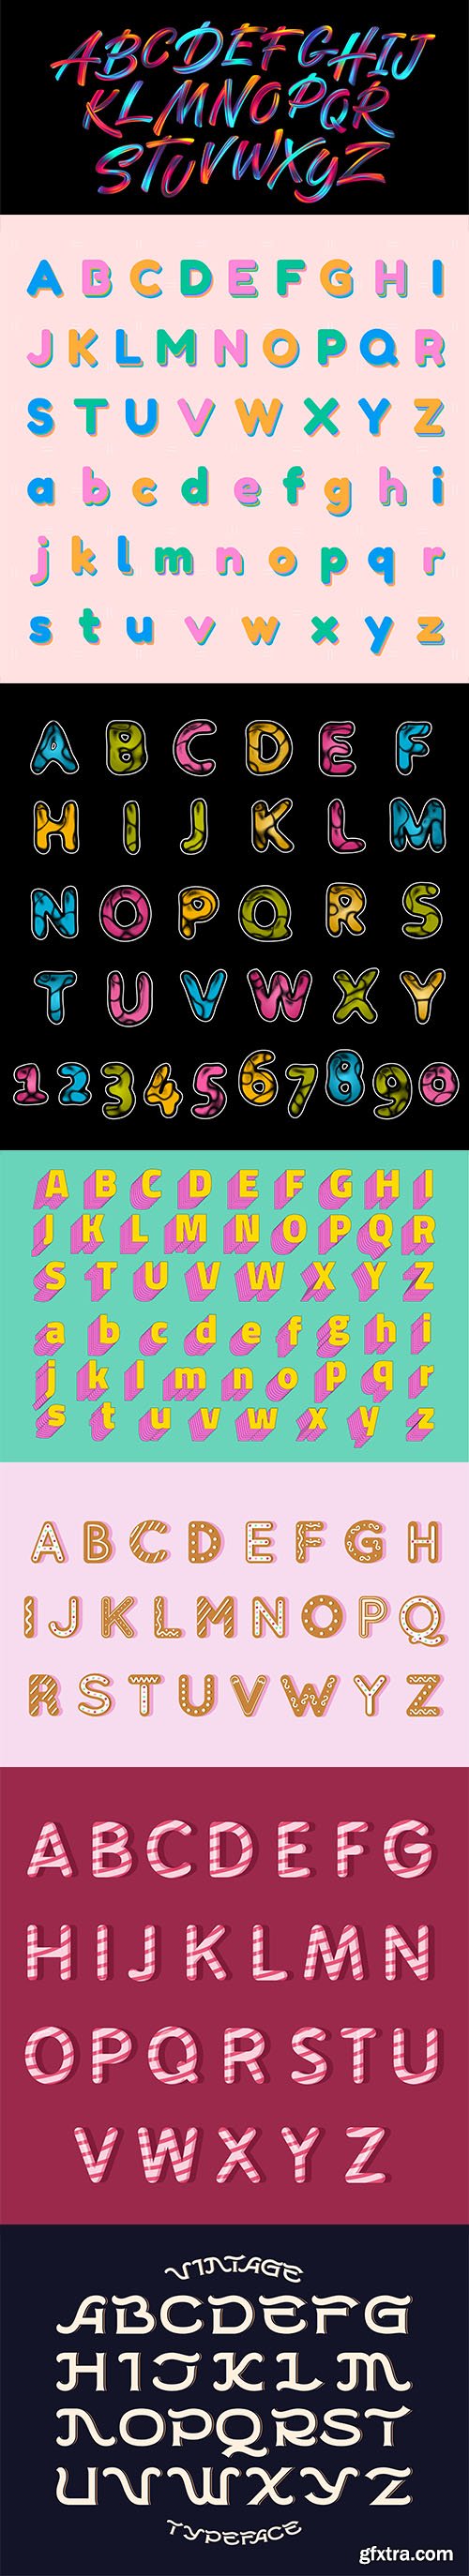 Alphabet collection of vector fonts